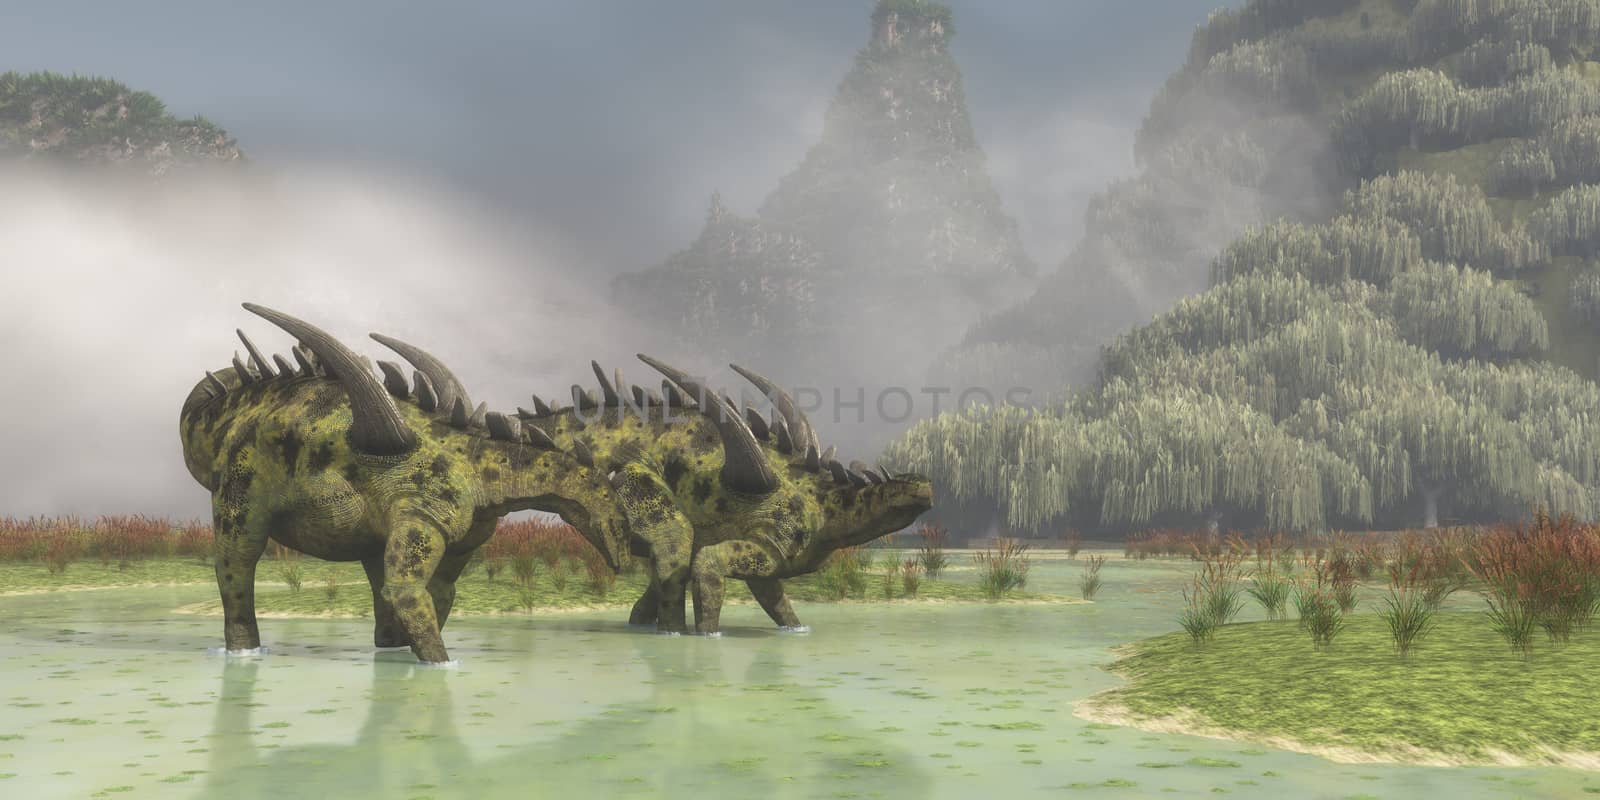 Gigantspinosaurus was a herbivorous dinosaur that lived in China in the Jurassic Period.